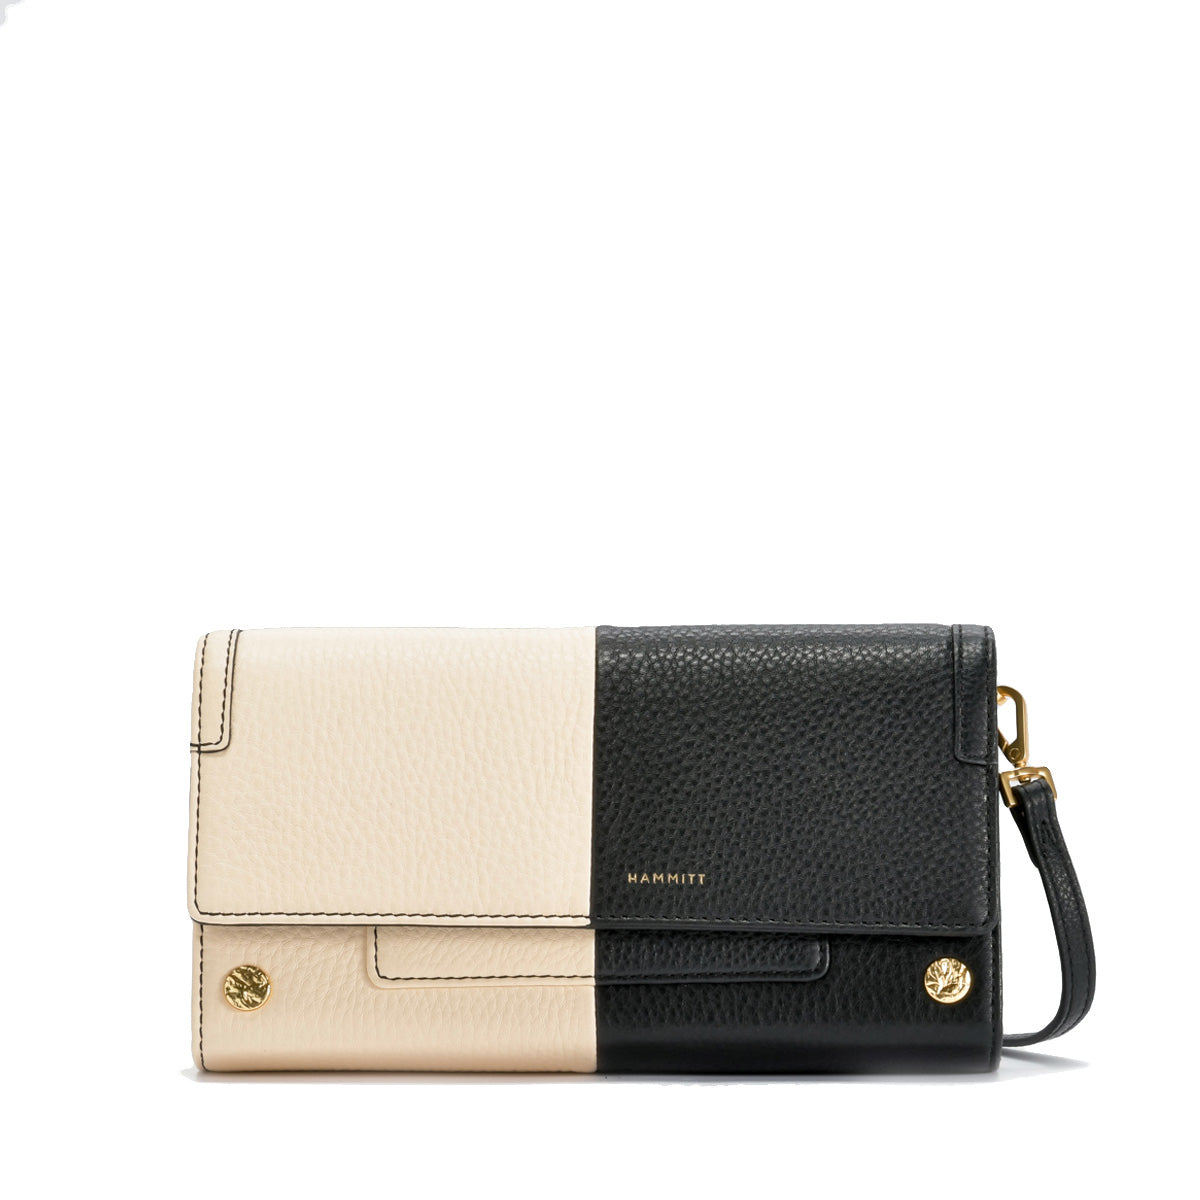 AJ Crossbody Clutch - Contrast Brushed Gold Hammered